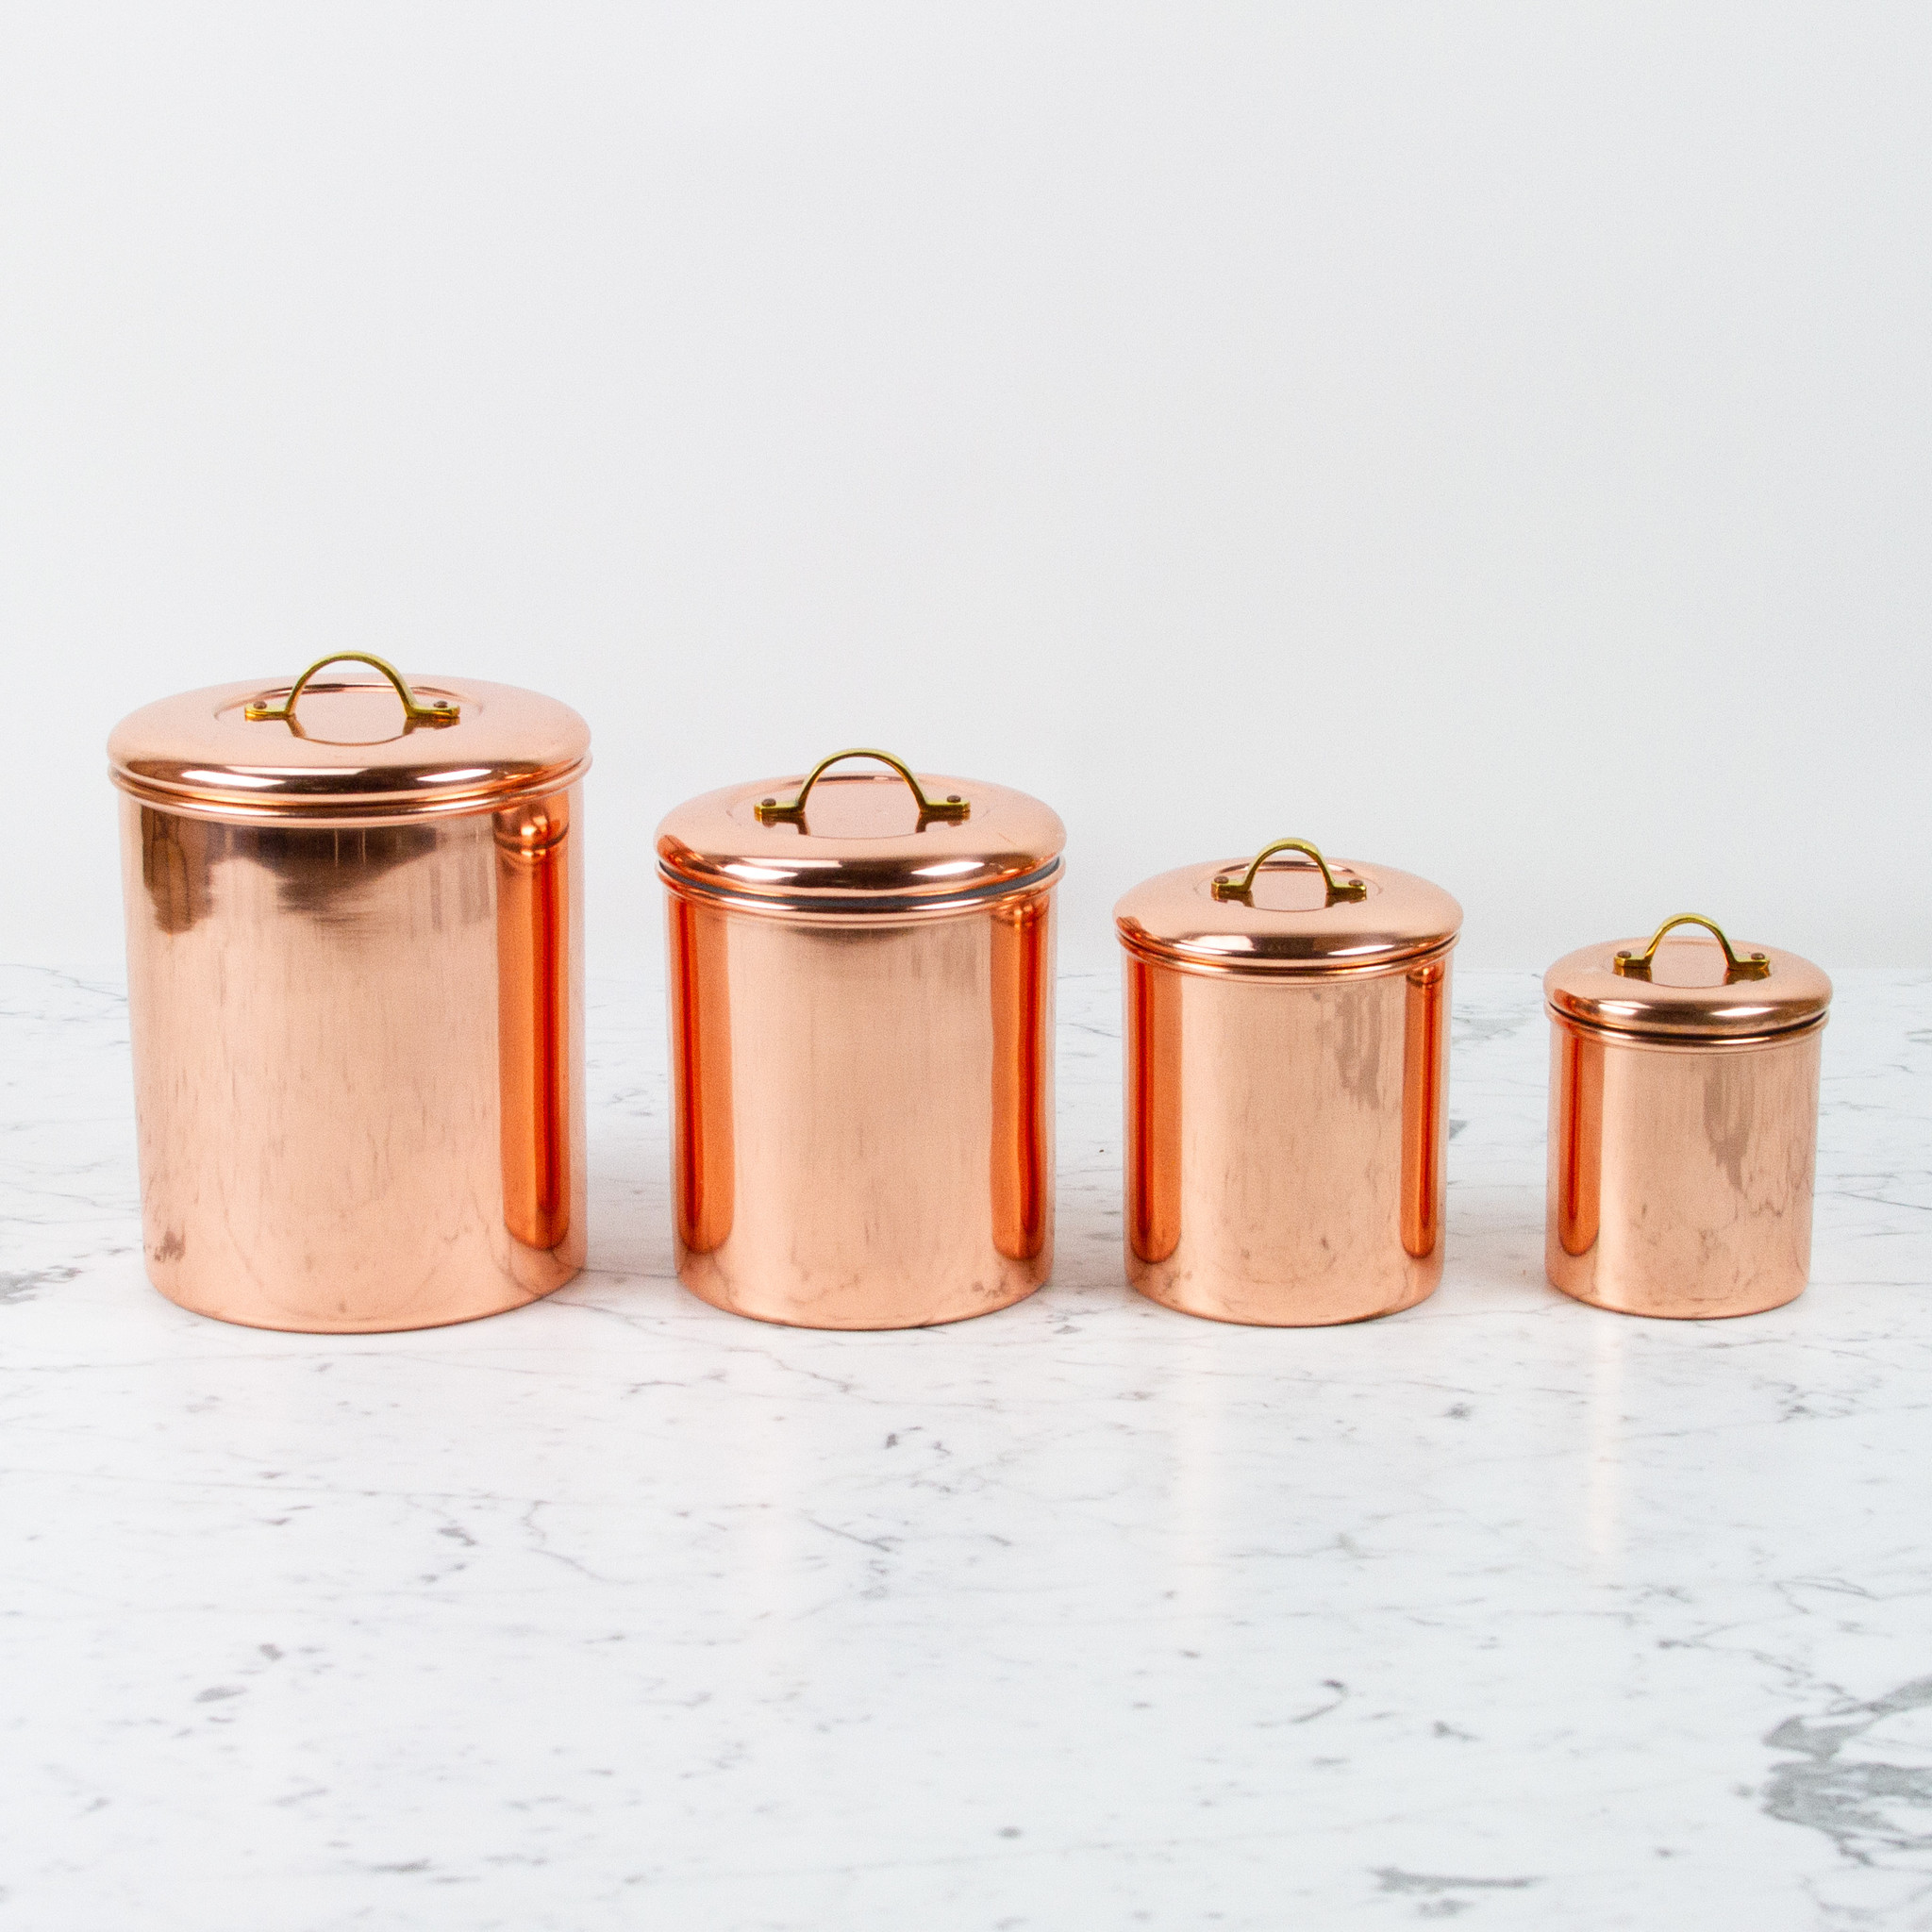 Copper Storage Canister Brass Handle - Extra Small - 4.75"